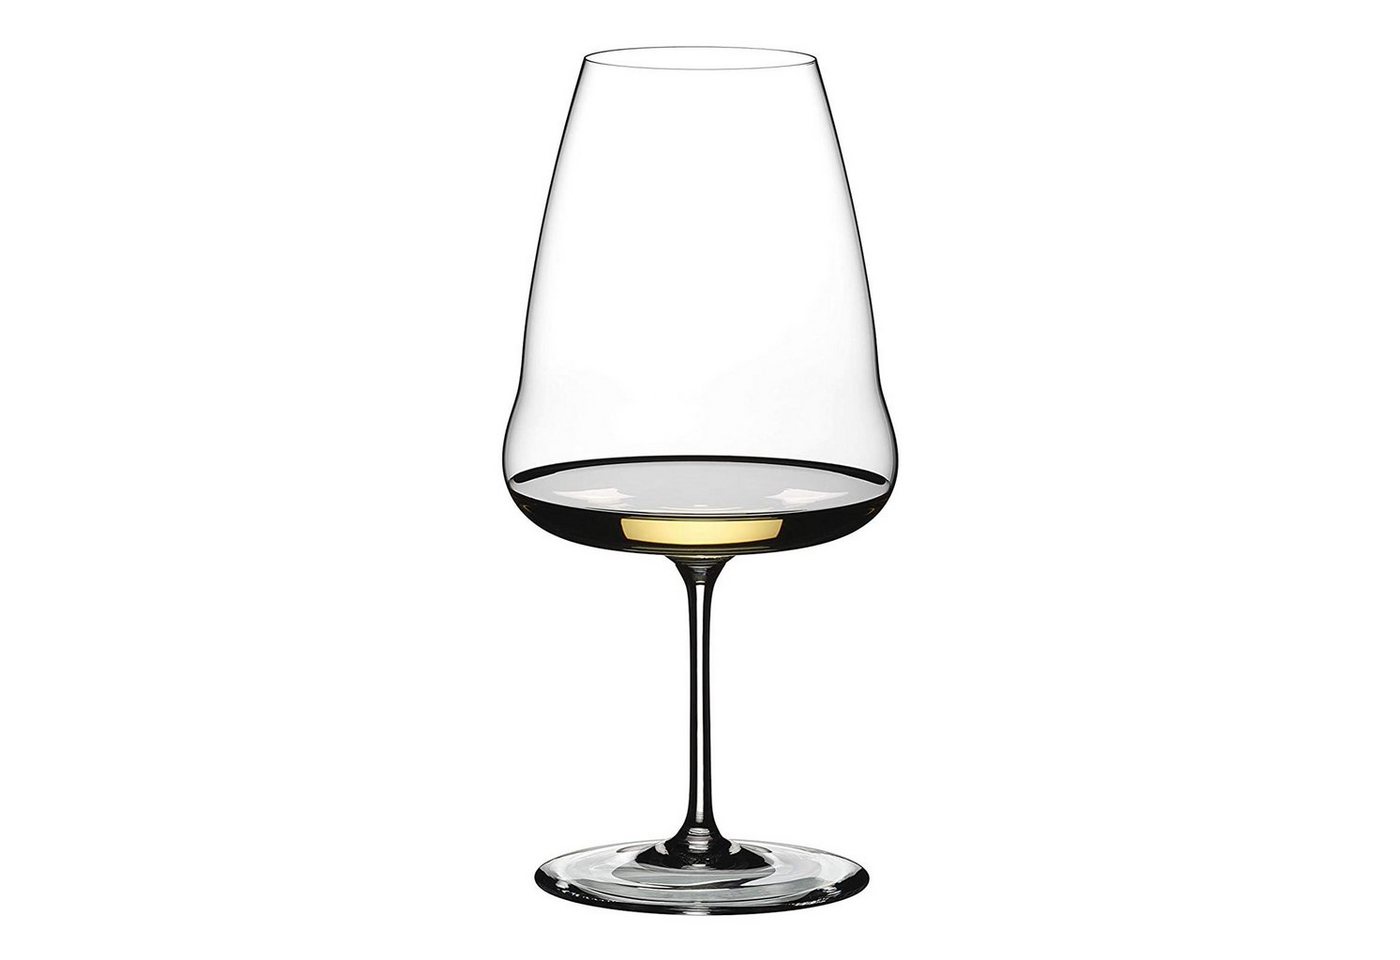 RIEDEL THE WINE GLASS COMPANY Glas Winewings Riesling Single Pack, Kristallglas von RIEDEL THE WINE GLASS COMPANY